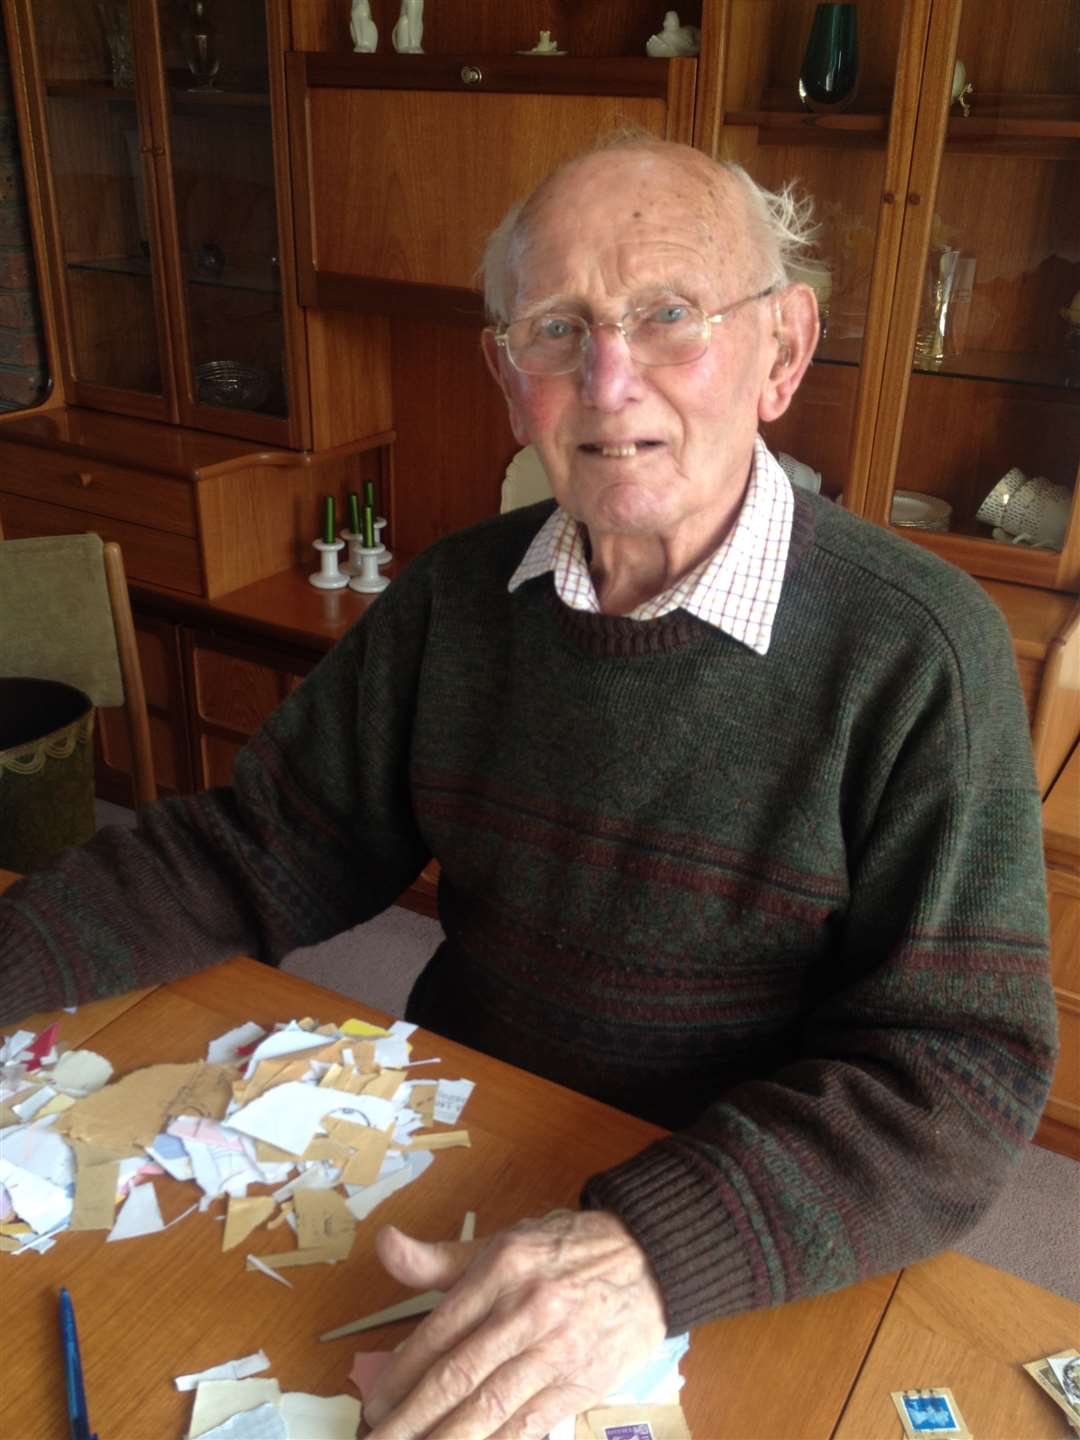 John Howard has been collecting stamps for charities for 30 years